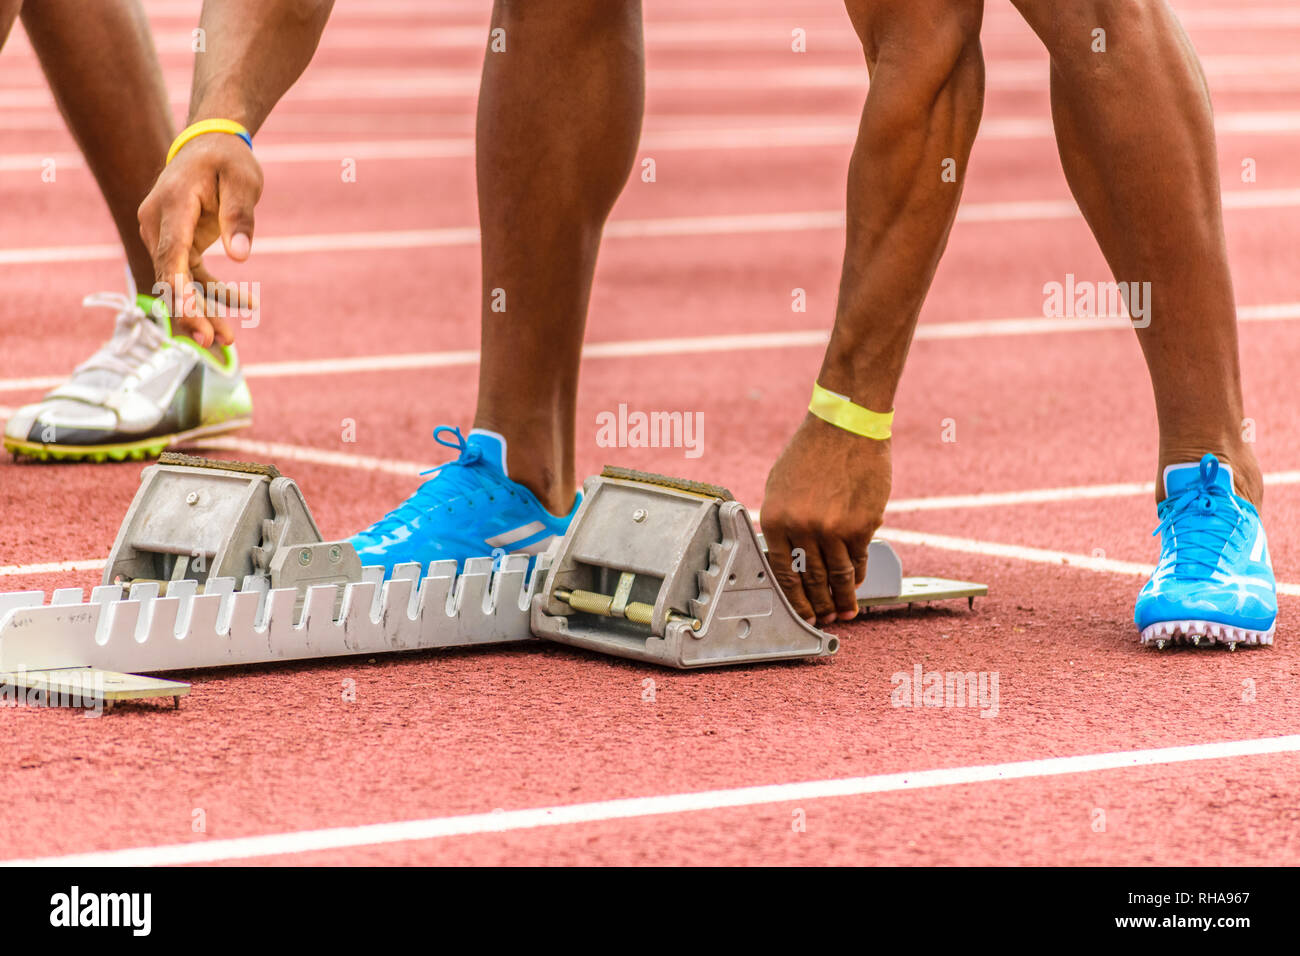 Starting blocks being adjusted by young black male athlete on outdoor track before start of race Stock Photo